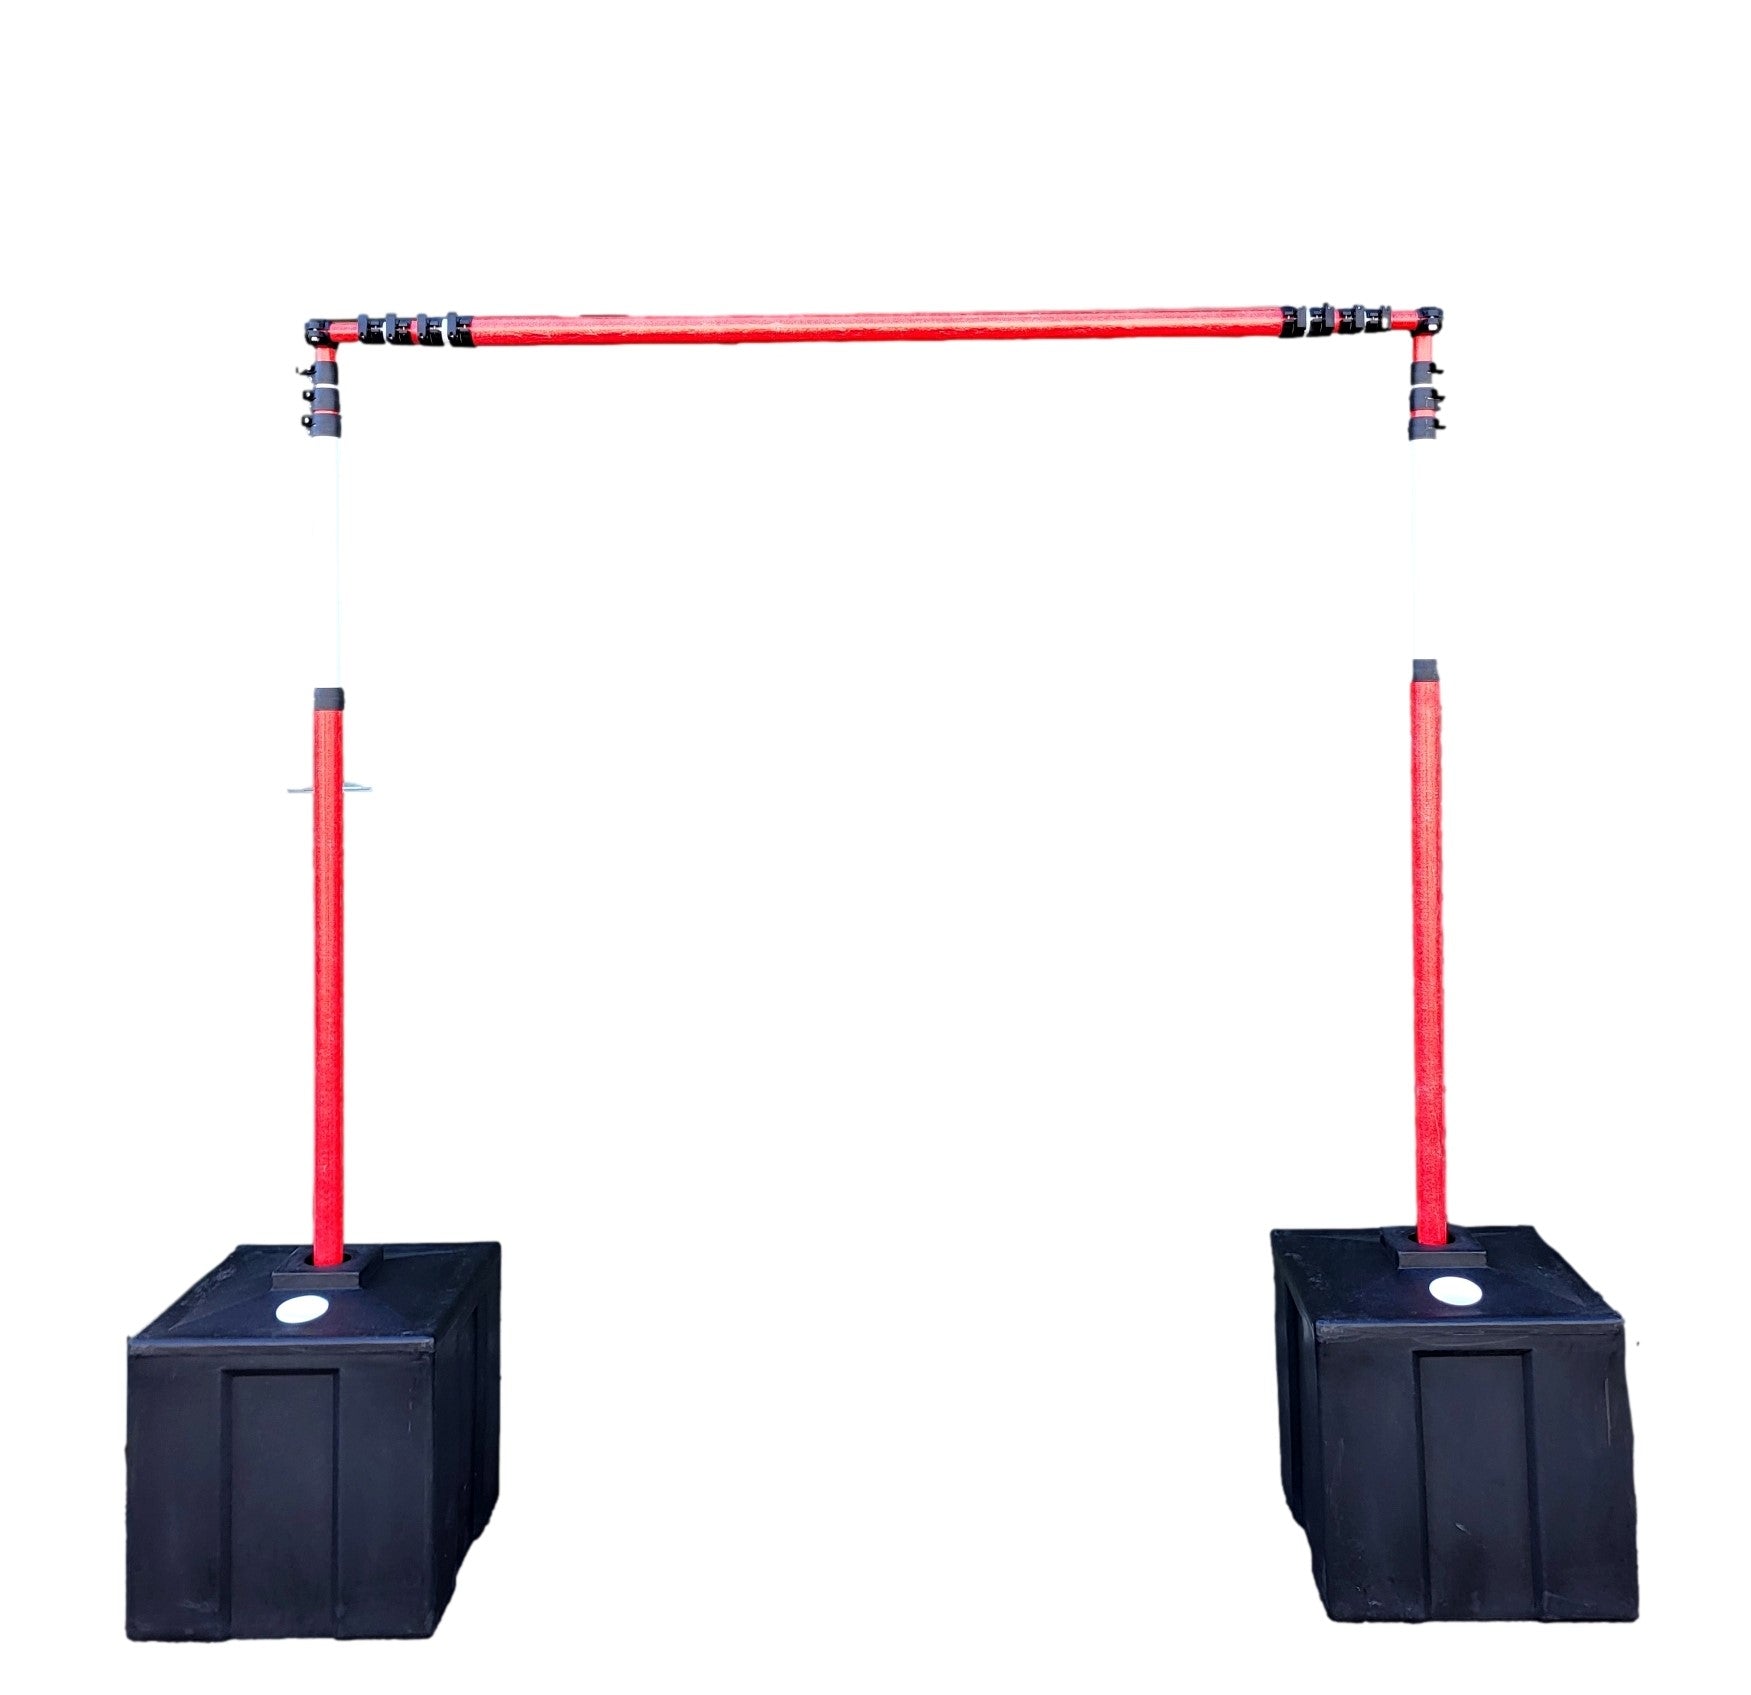 GS6 Height Restriction Kit – Crossbar and Metro Block Bases – Kit No 1